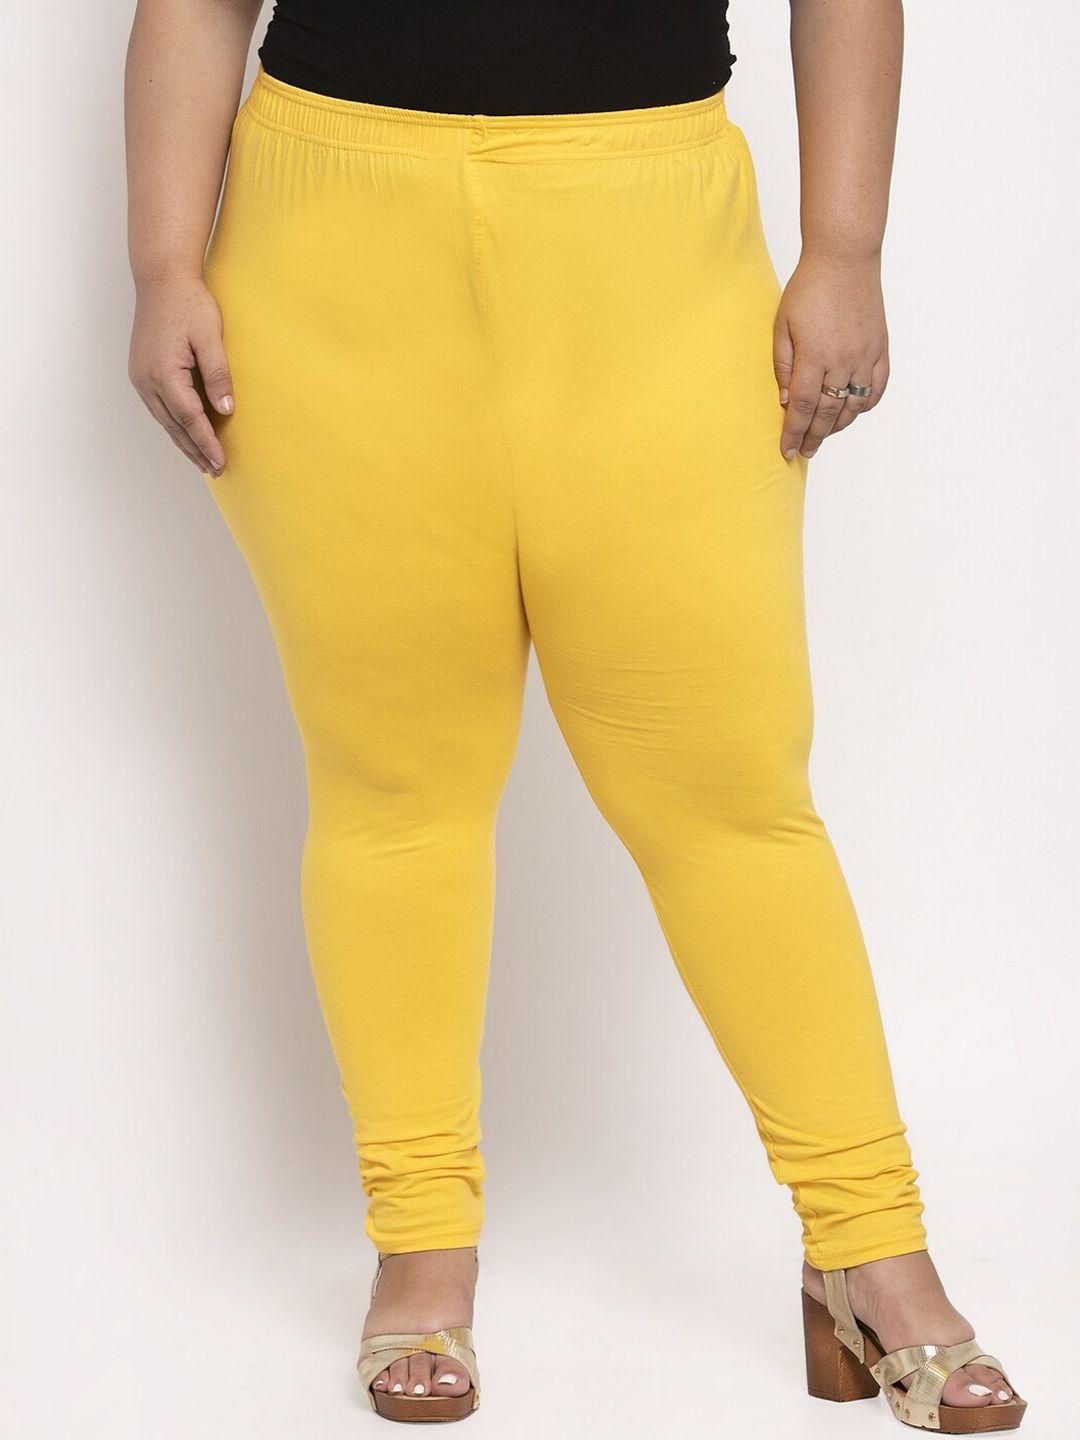 tag 7 plus women yellow solid plus size ankle-length leggings